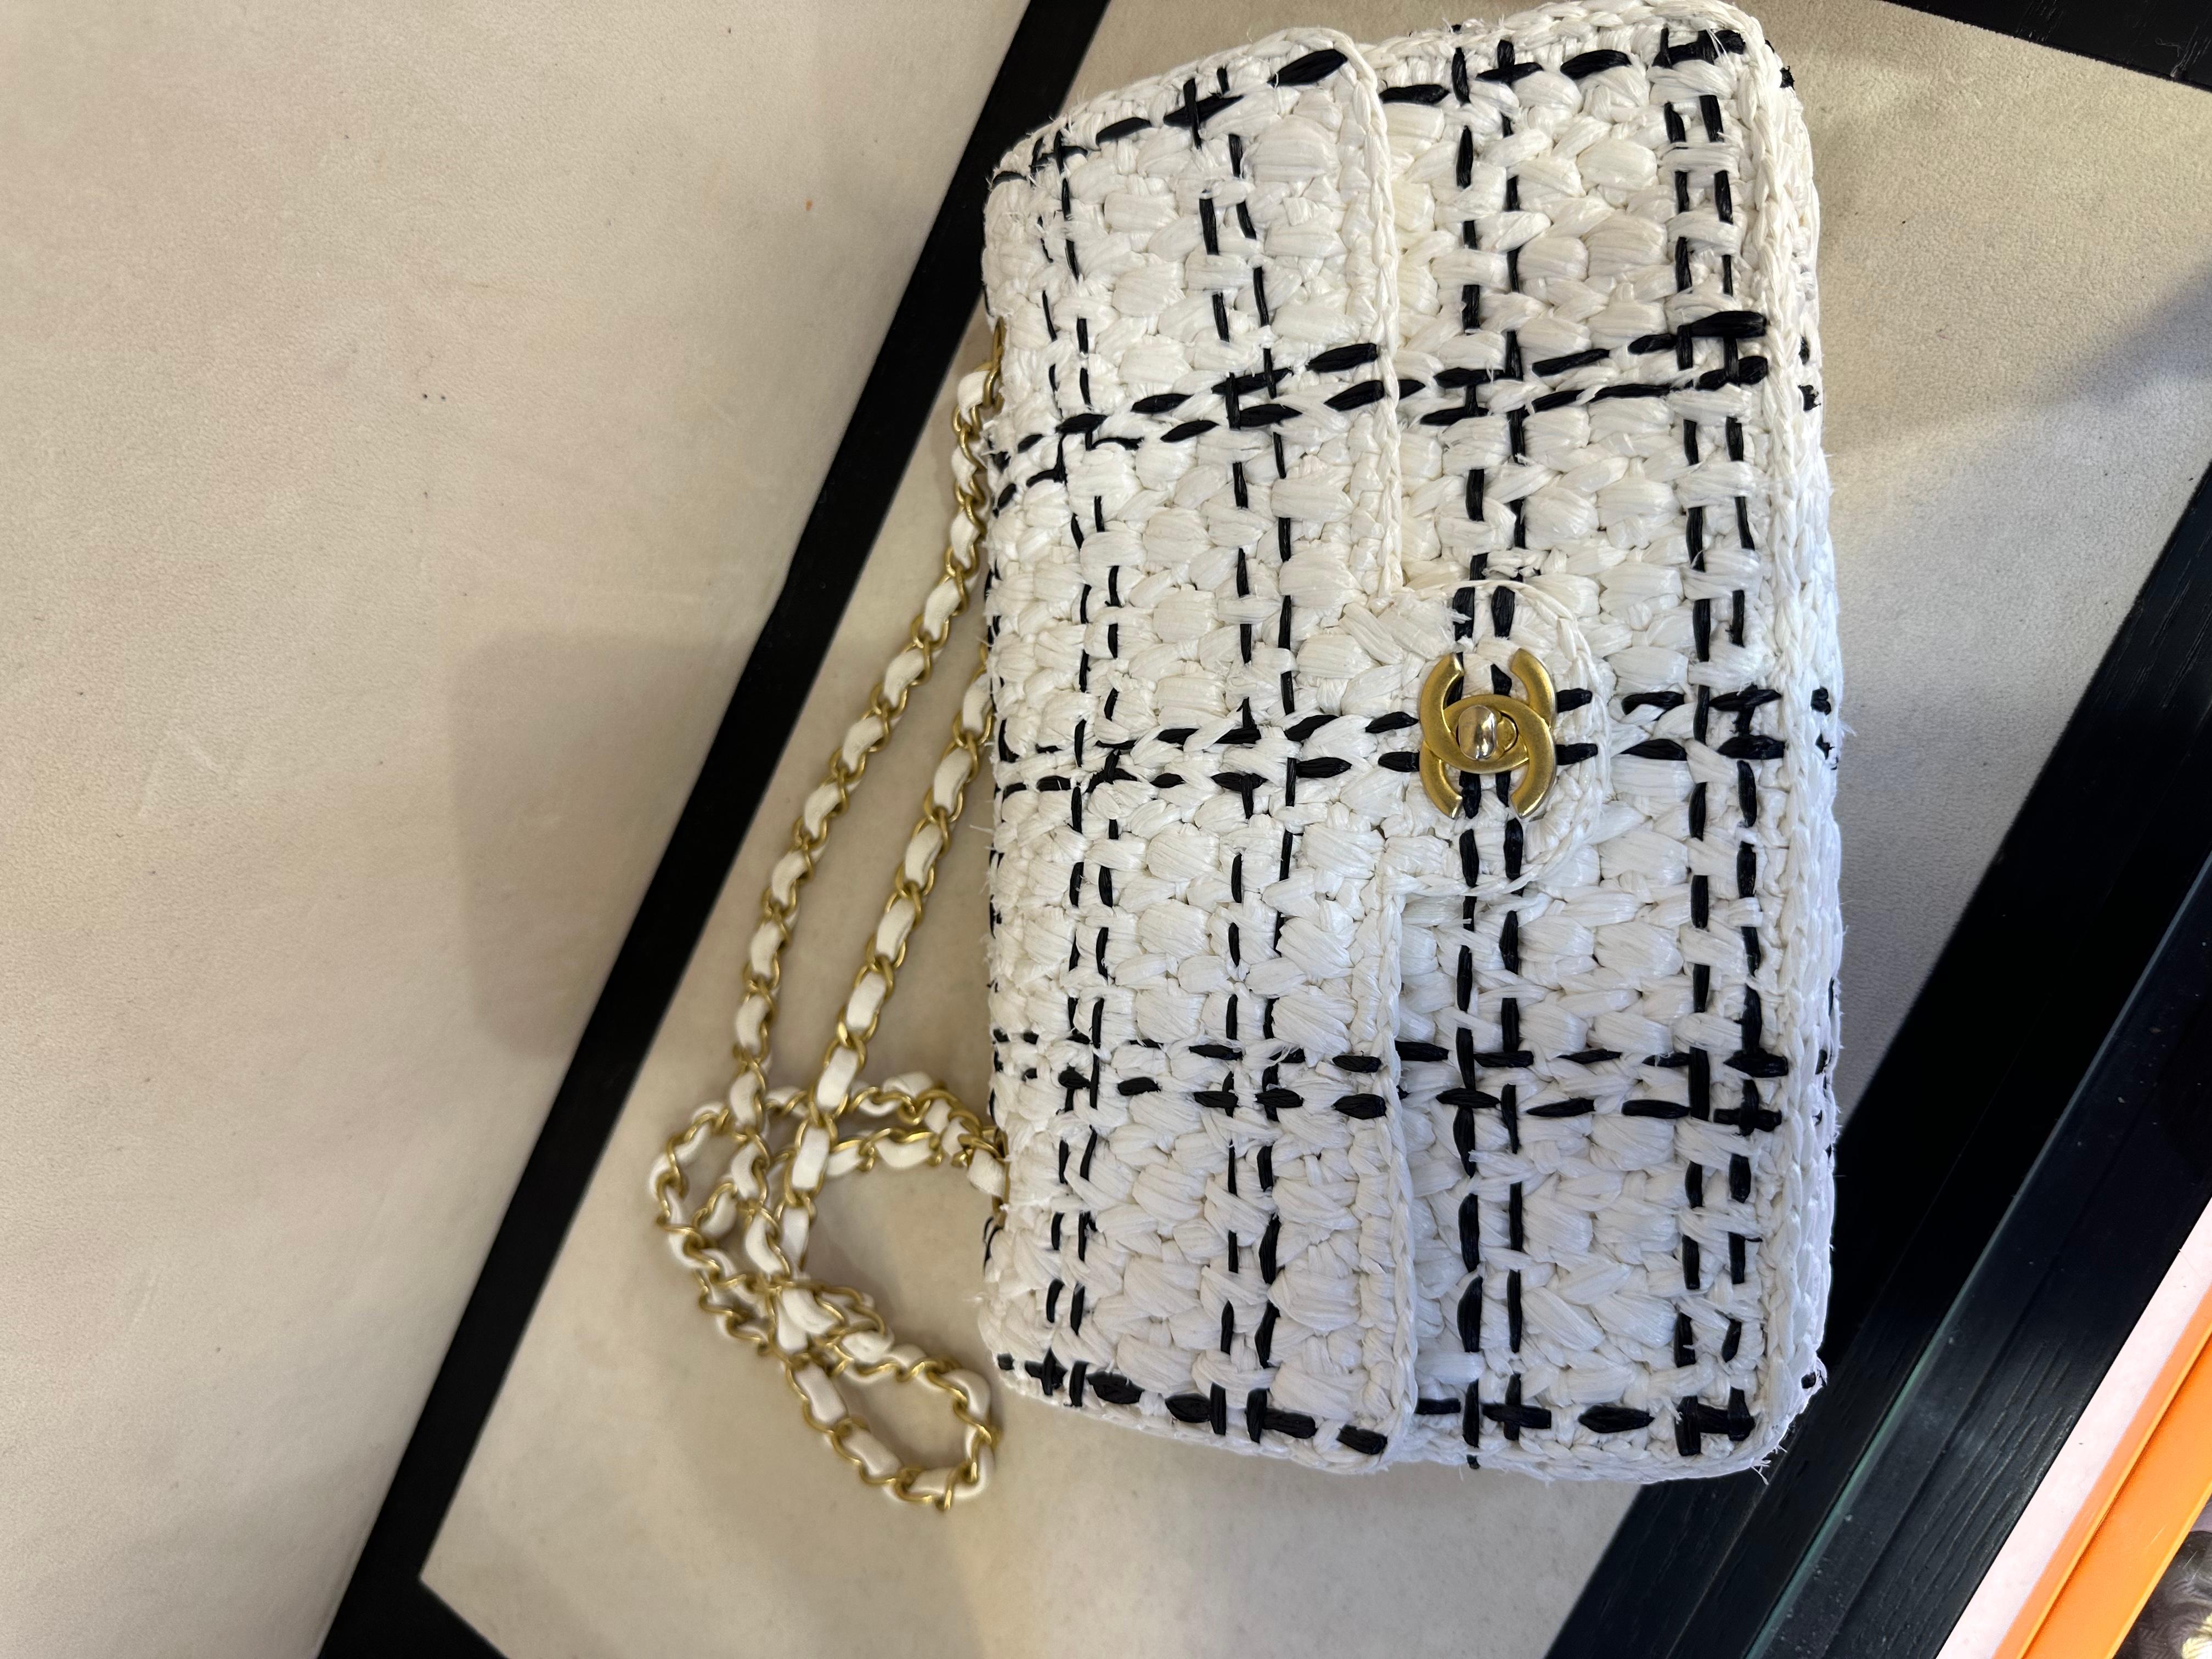 CHANEL Raffia Effect Tweed Braided Medium Flap in White and Black. 2023 spring summer Ready- to-wear collection. This chic bag is crafted of woven tweed. The bag features a gold chain-link shoulder strap threaded with ivory leather. The flap opens